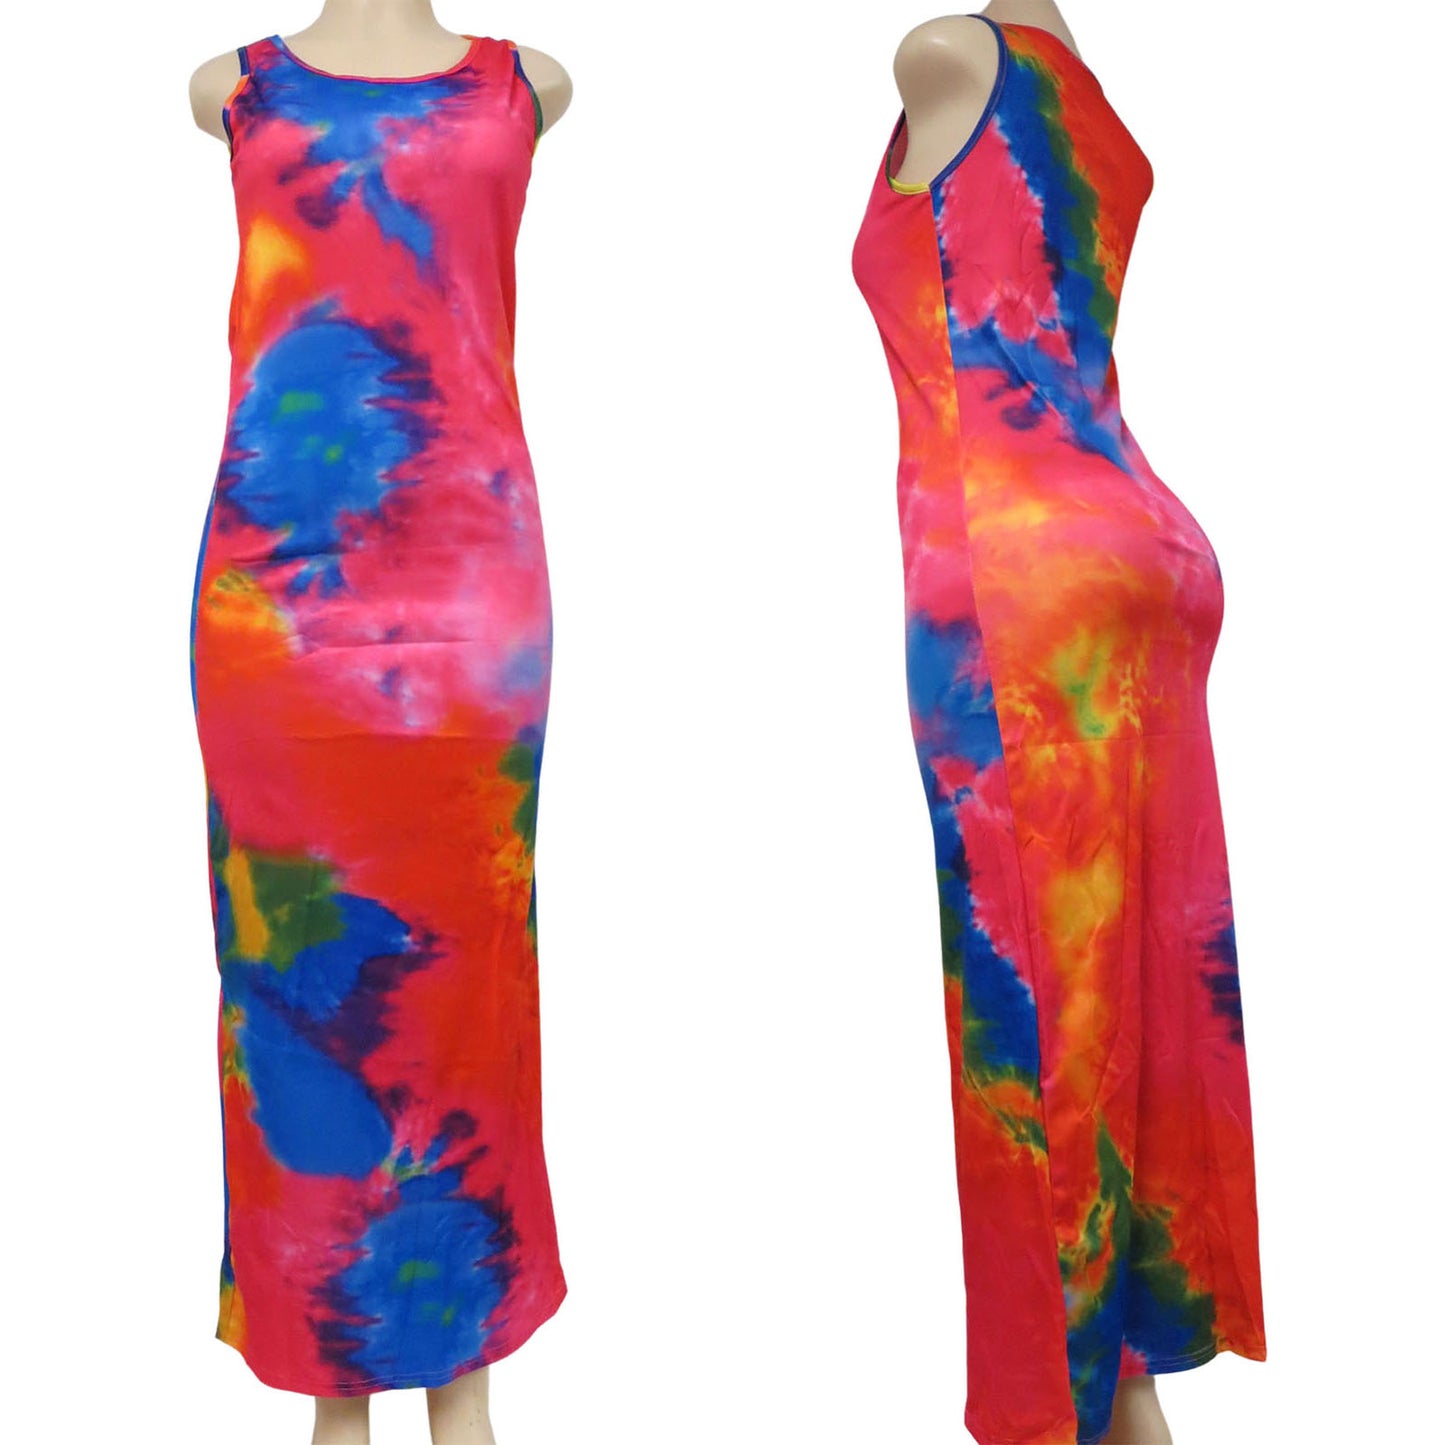 wholesale tie dye long sleeveless dress for women in multicolor red pink blue yellow and green